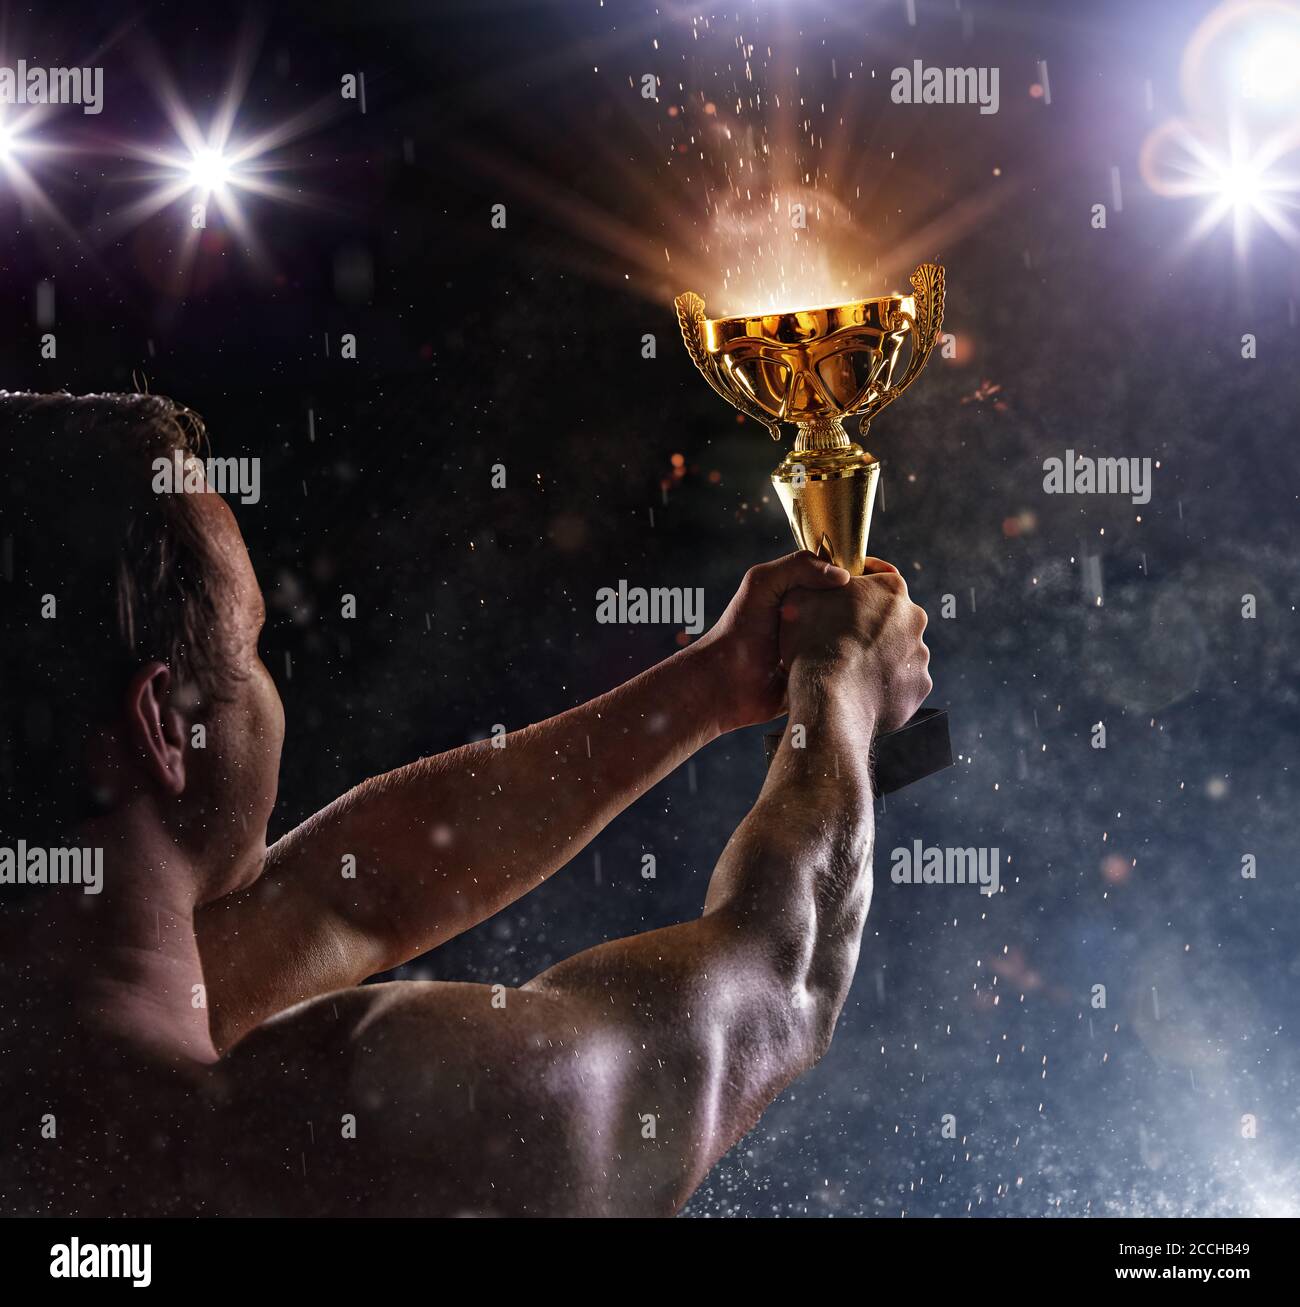 Back view of man fighter holding trophy cup in hands, victory gesture. Concept of hard work, glory and success. Very high resolution image Stock Photo